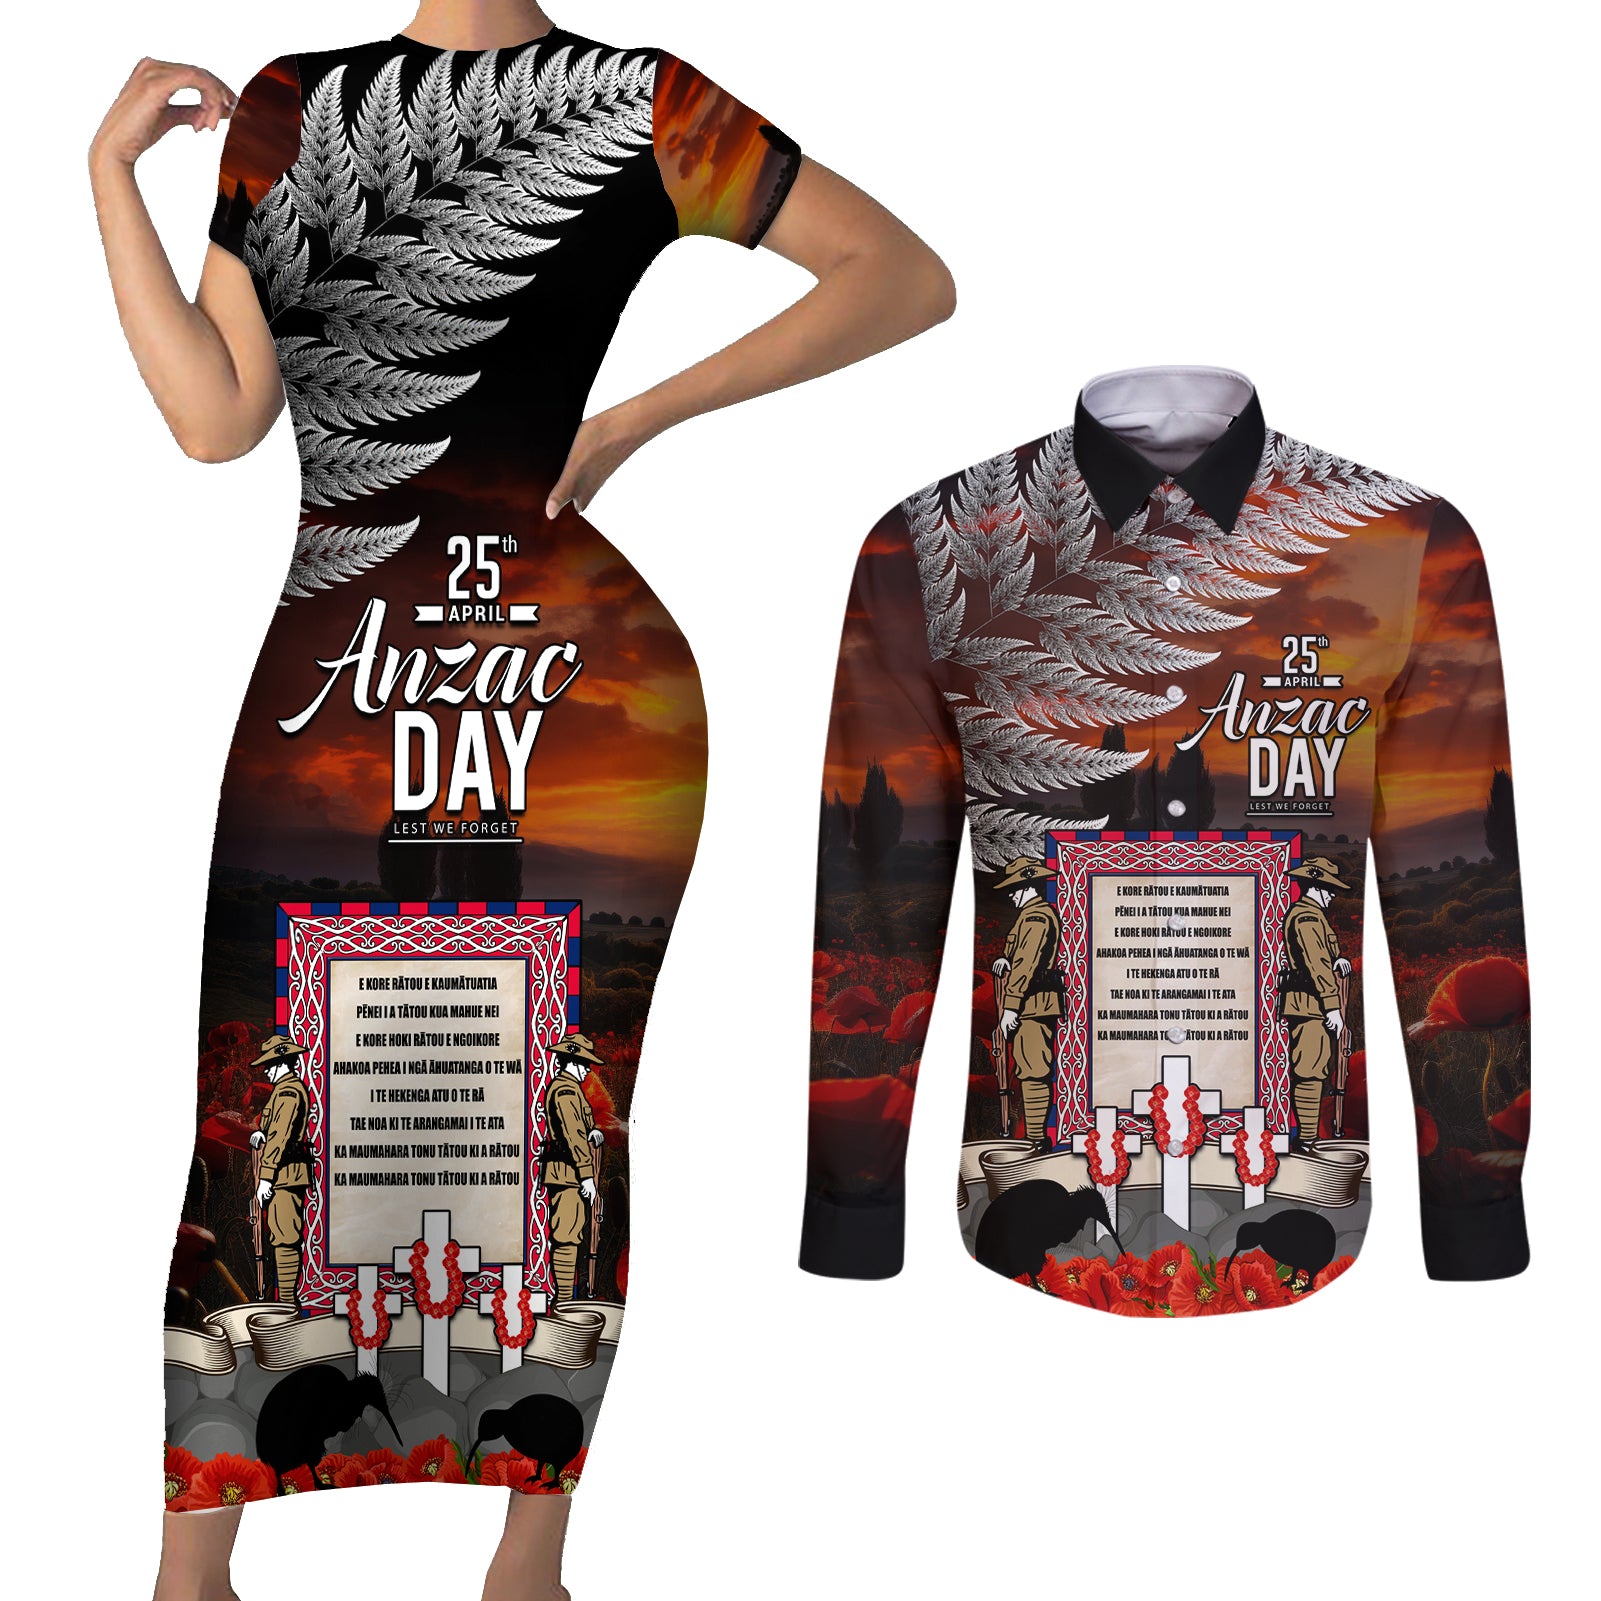 New Zealand ANZAC Day Couples Matching Short Sleeve Bodycon Dress and Long Sleeve Button Shirt The Ode of Remembrance and Silver Fern